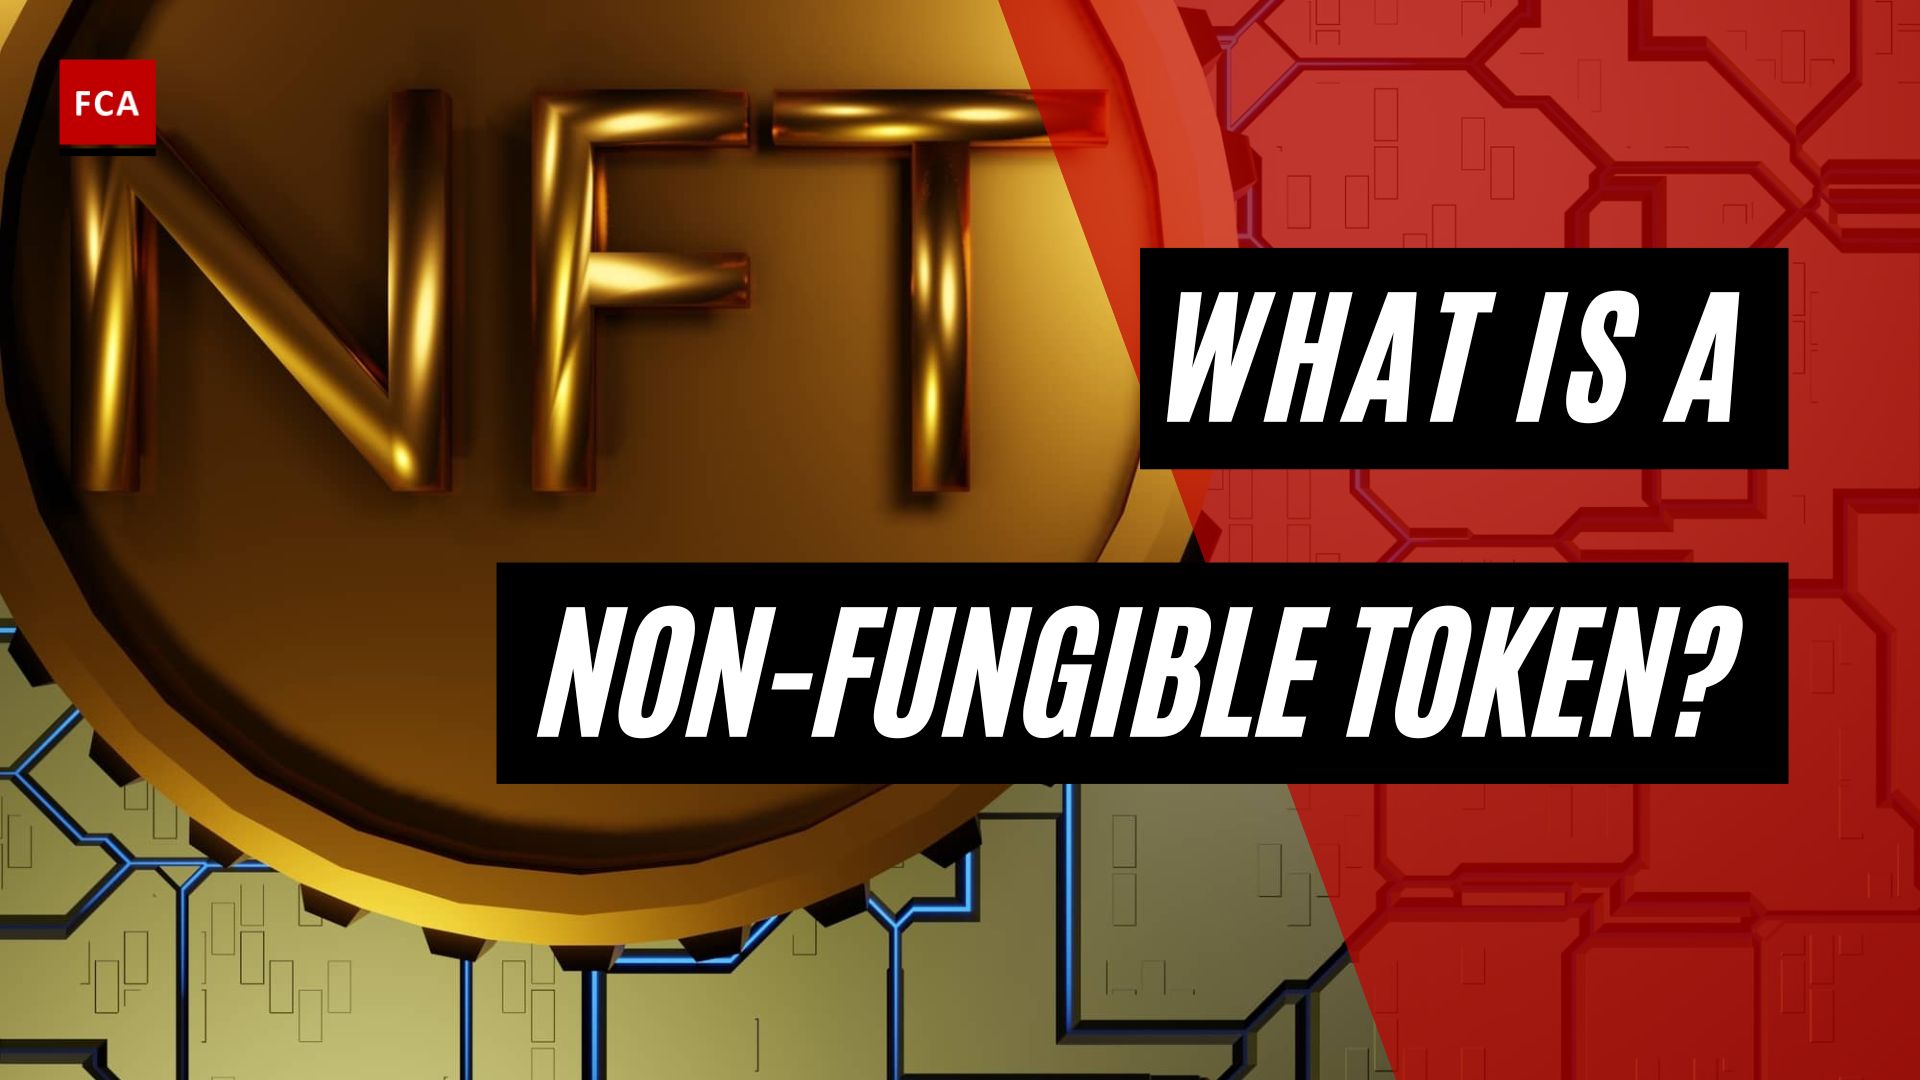 What Is A Non-Fungible Token?